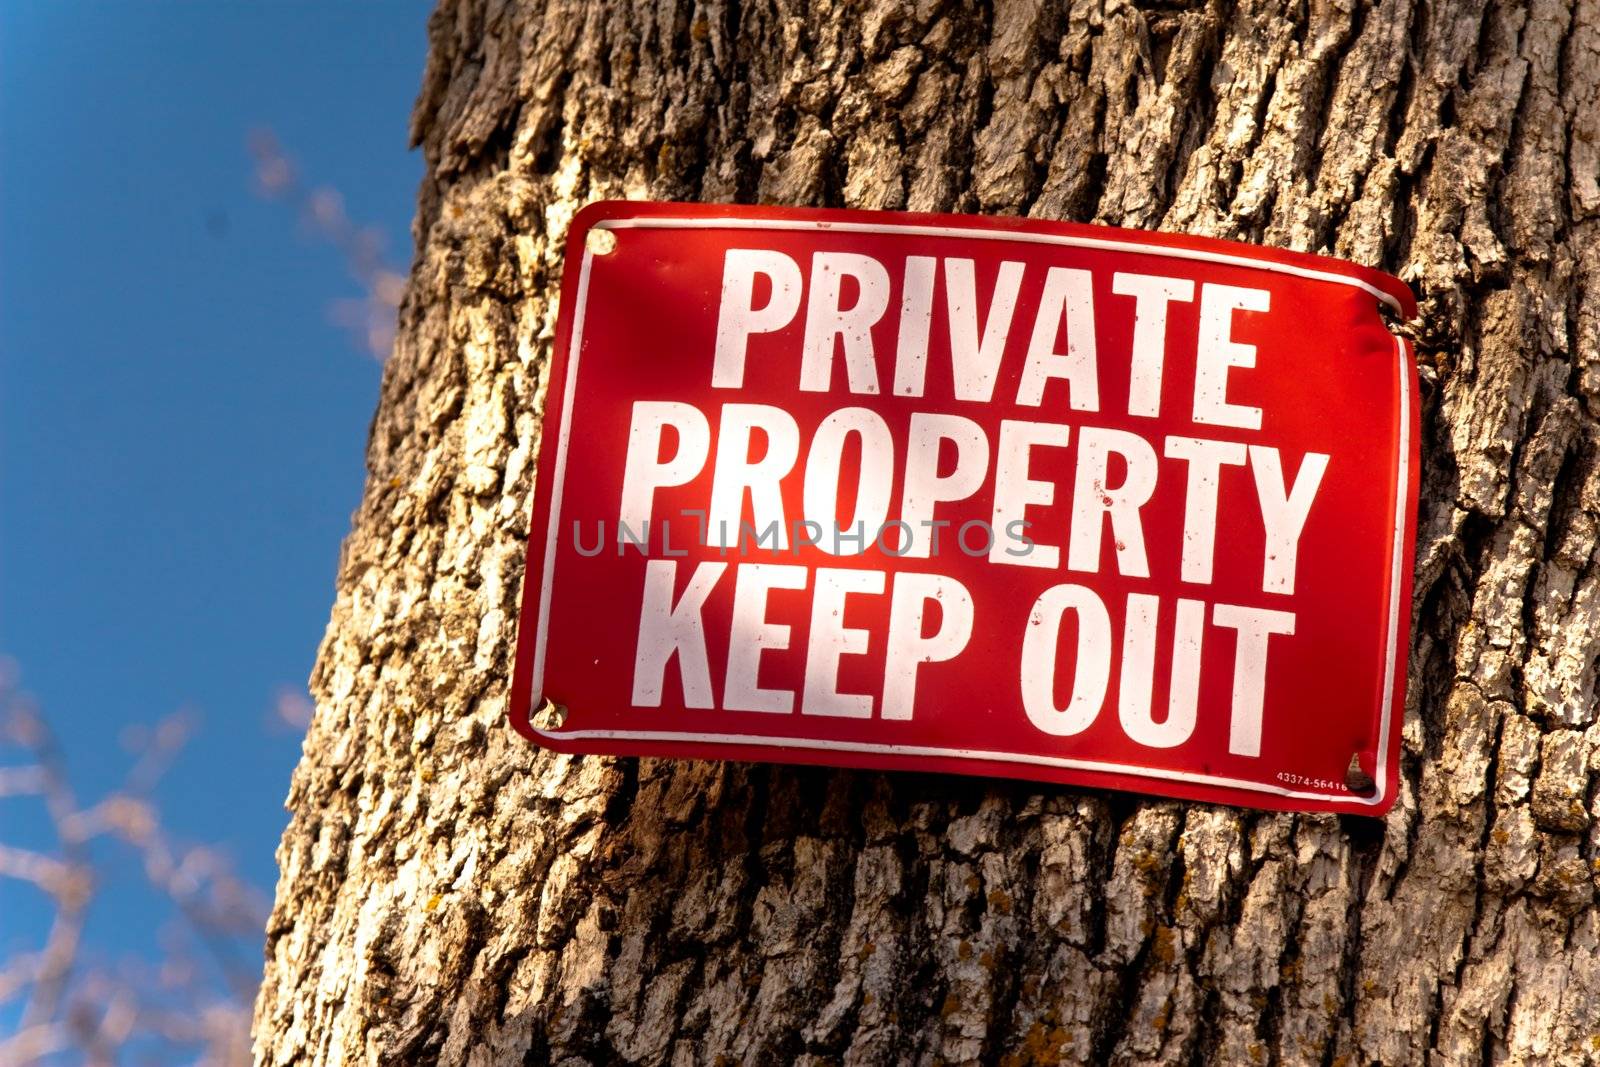 Red Keep Out sign nailed to tree trunk, a sliver of blue sky on left of frame